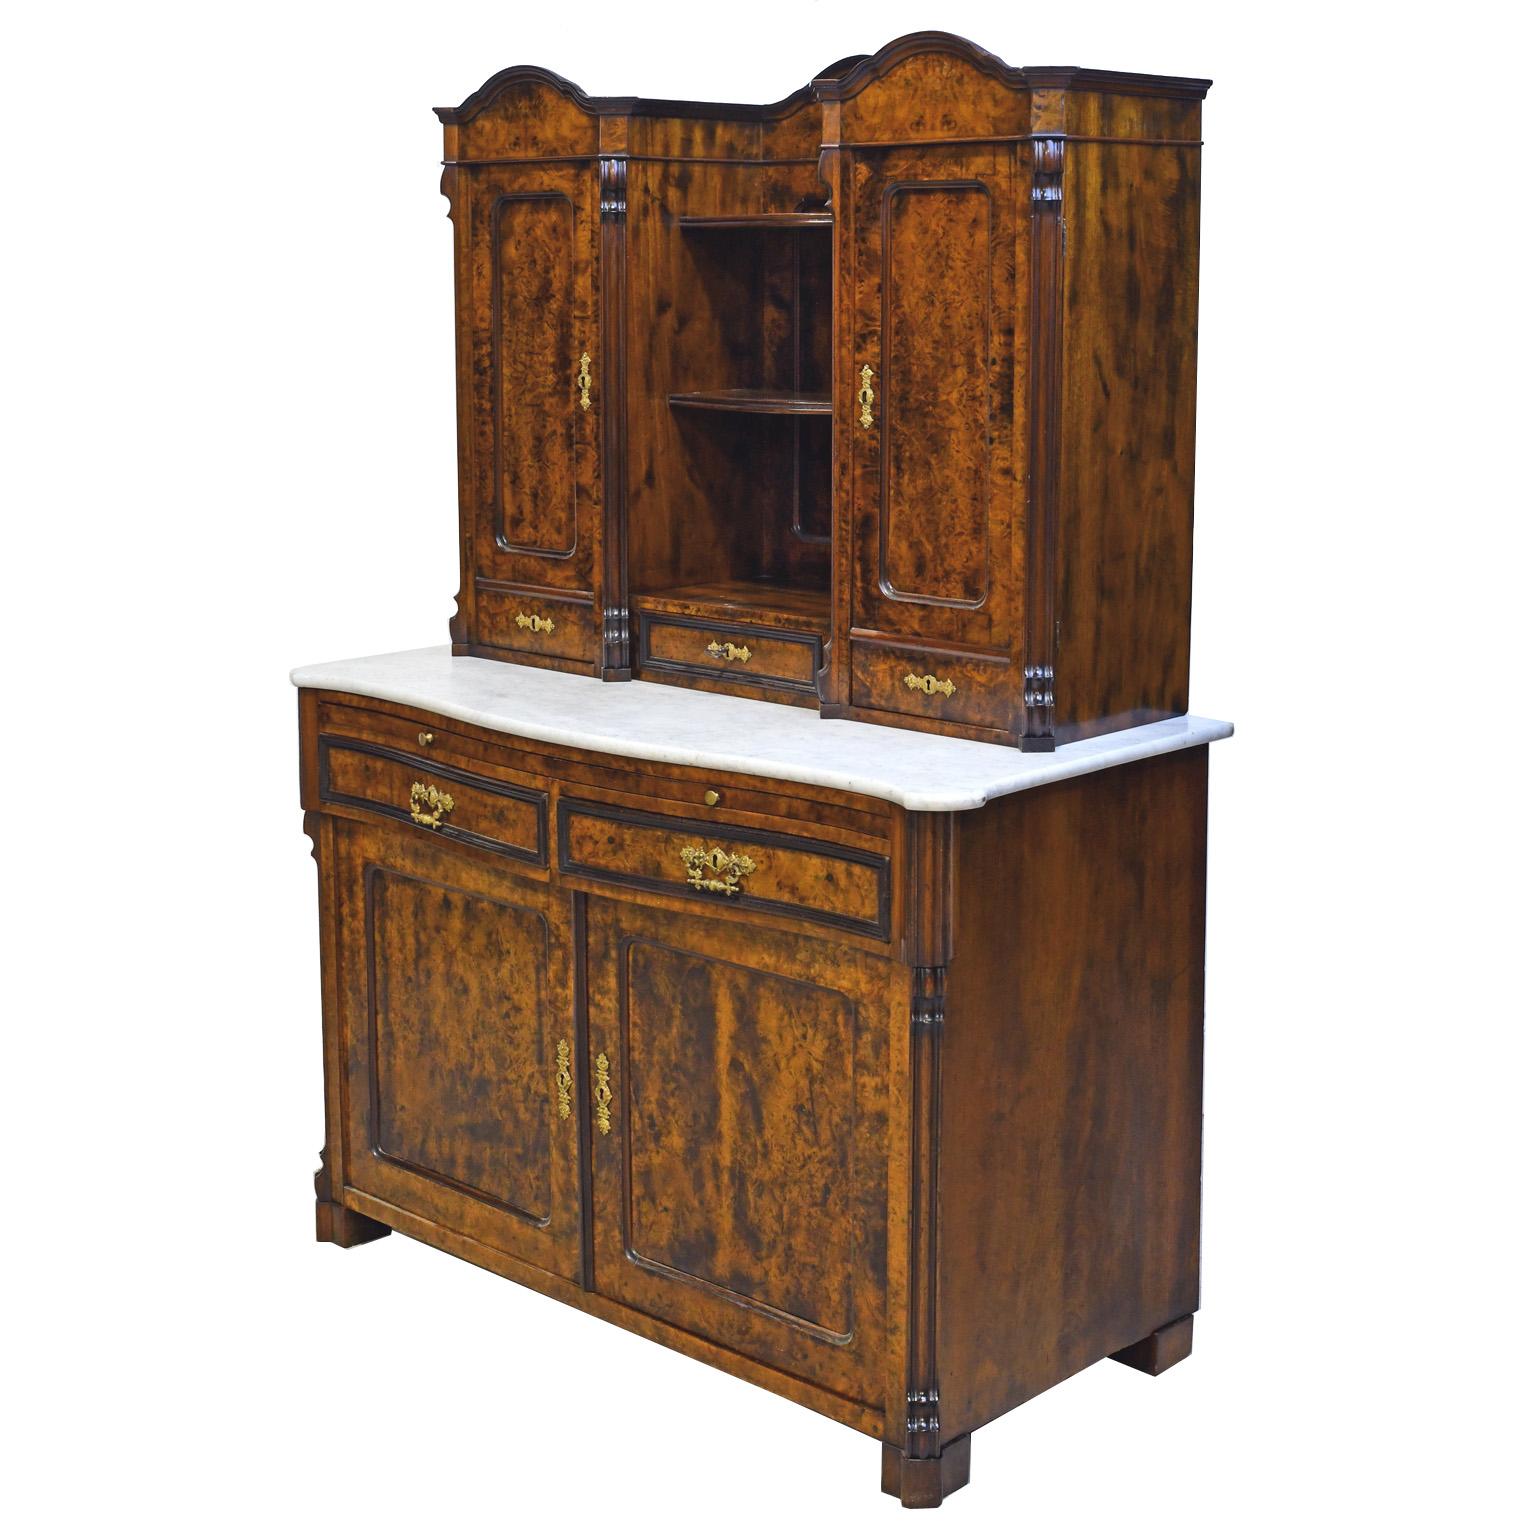 A German Louis-Philippe buffet in fine burled walnut with upper cabinet resting on white Carrara marble top over a base with a pull-out work station. This beautiful cabinet offers multiple drawers of different sizes and closed as well as open